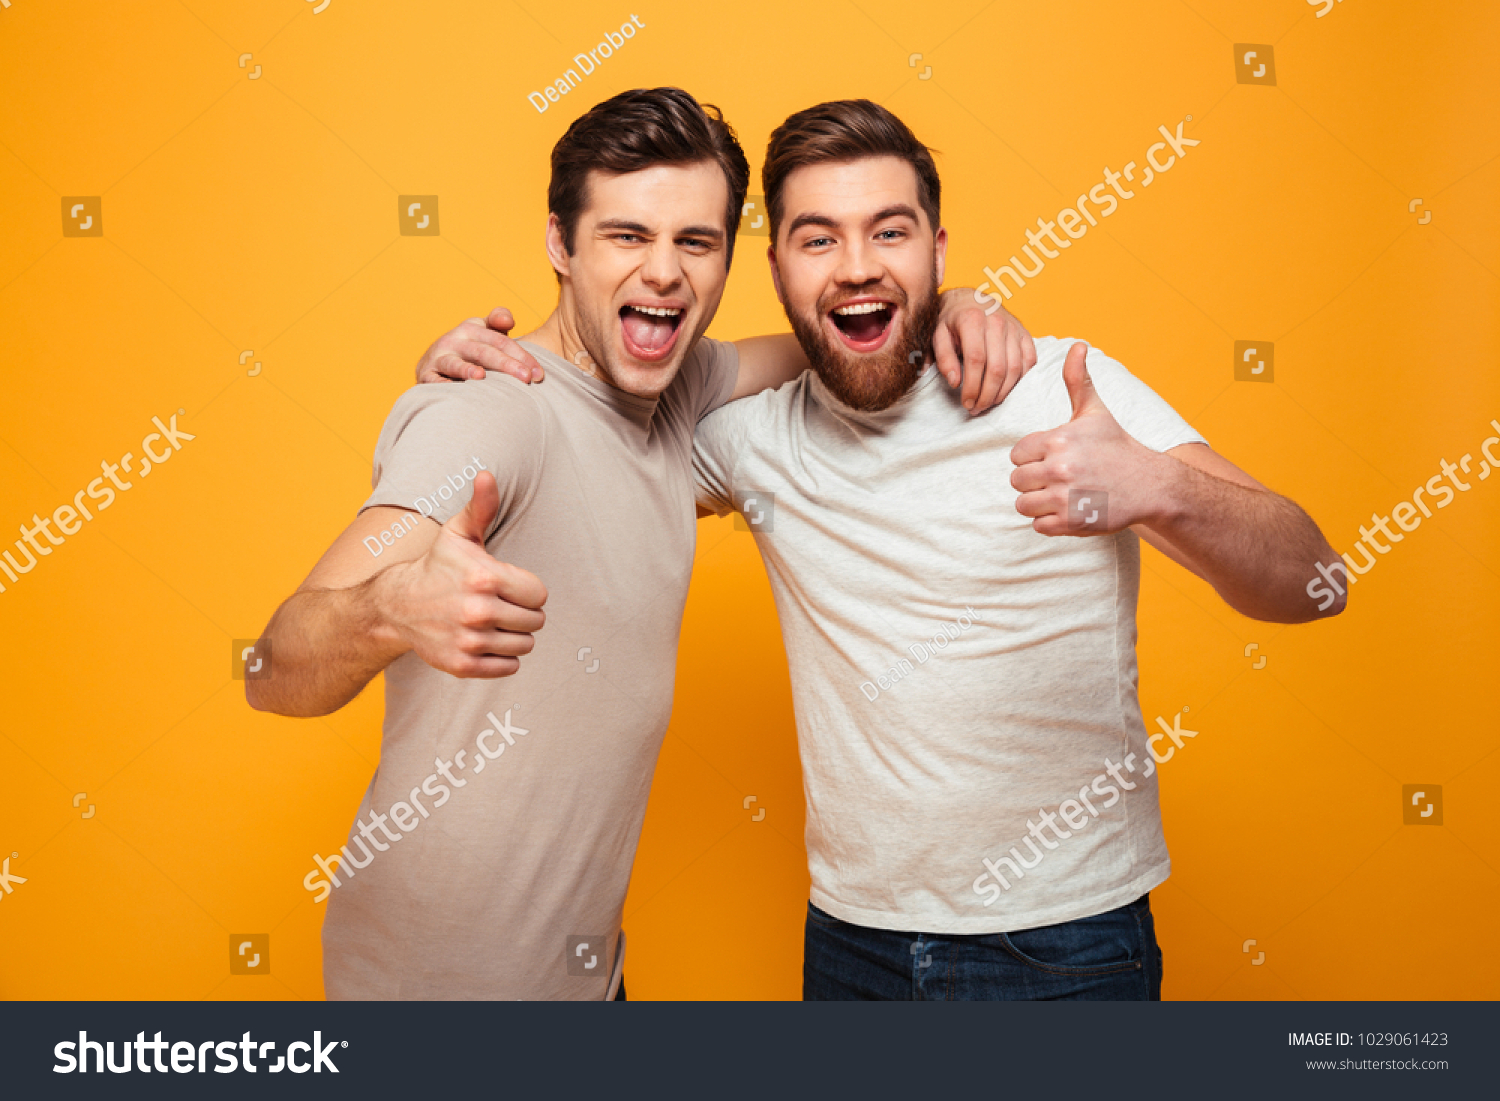 Portrait of a two happy young men showing thumbs up isolated over yellow background